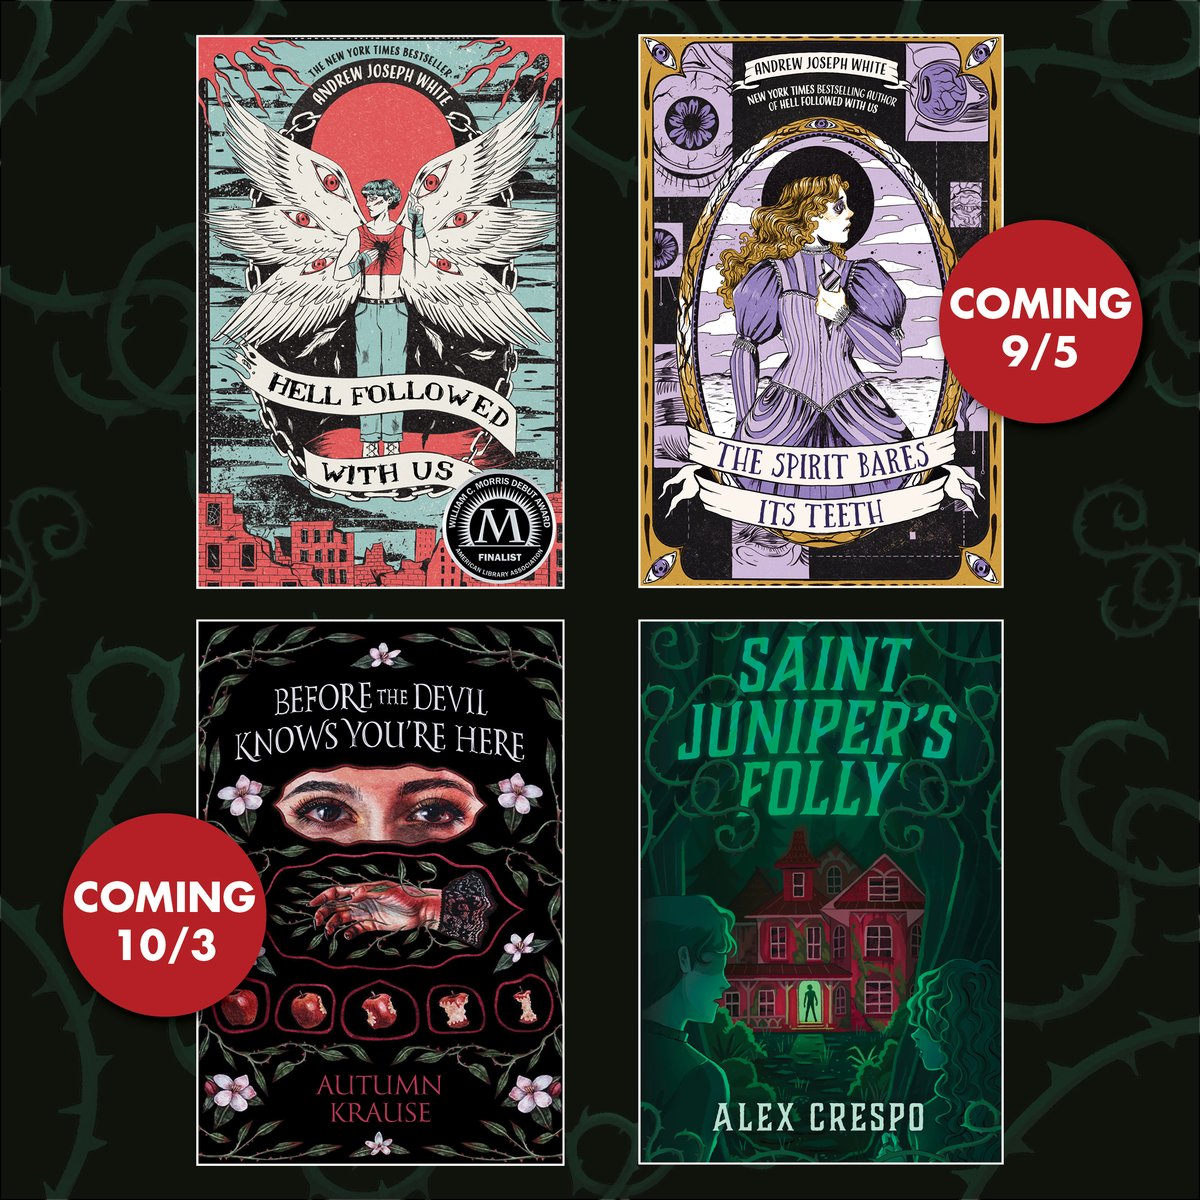 For all the #yahorror fans out there, we have some recommendations! 👻

P.S. We hope it's haunting you if you haven't pre-ordered THE SPIRIT BARES ITS TEETH and BEFORE THE DEVIL KNOWS YOU'RE HERE...